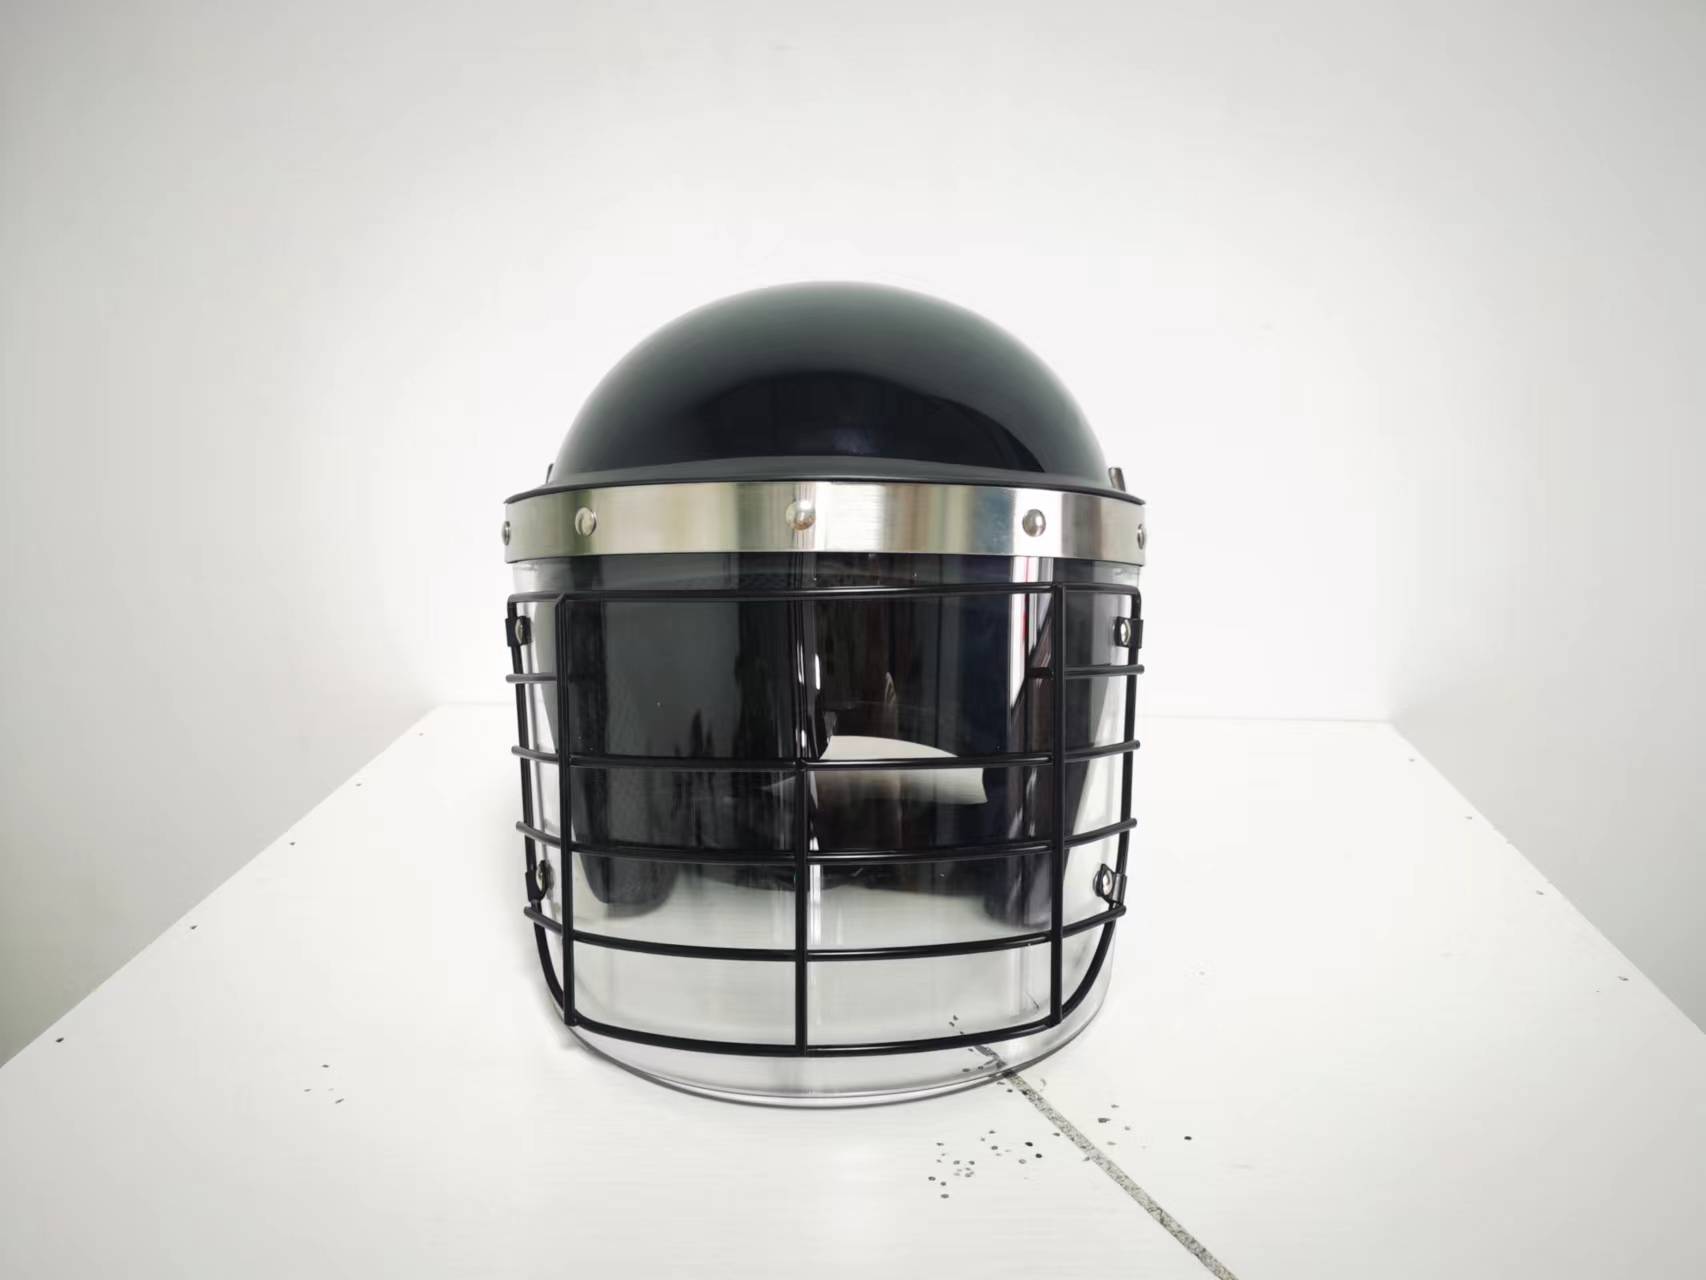 Anti Riot Helmet with Clear Face Shield Metal Net